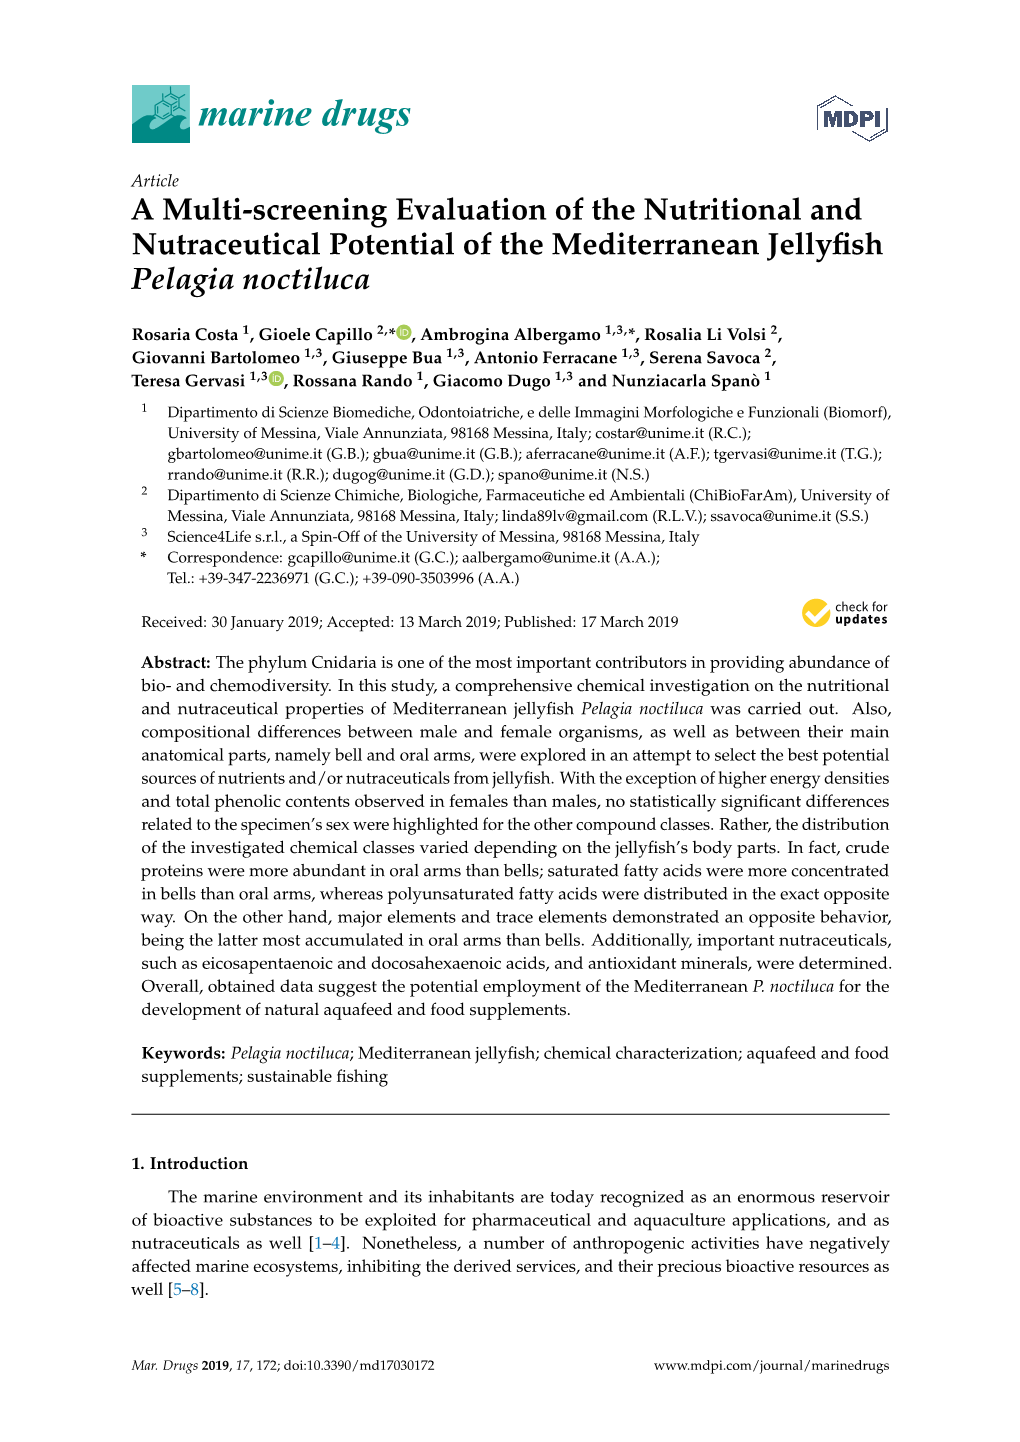 A Multi-Screening Evaluation of the Nutritional and Nutraceutical Potential of the Mediterranean Jellyﬁsh Pelagia Noctiluca